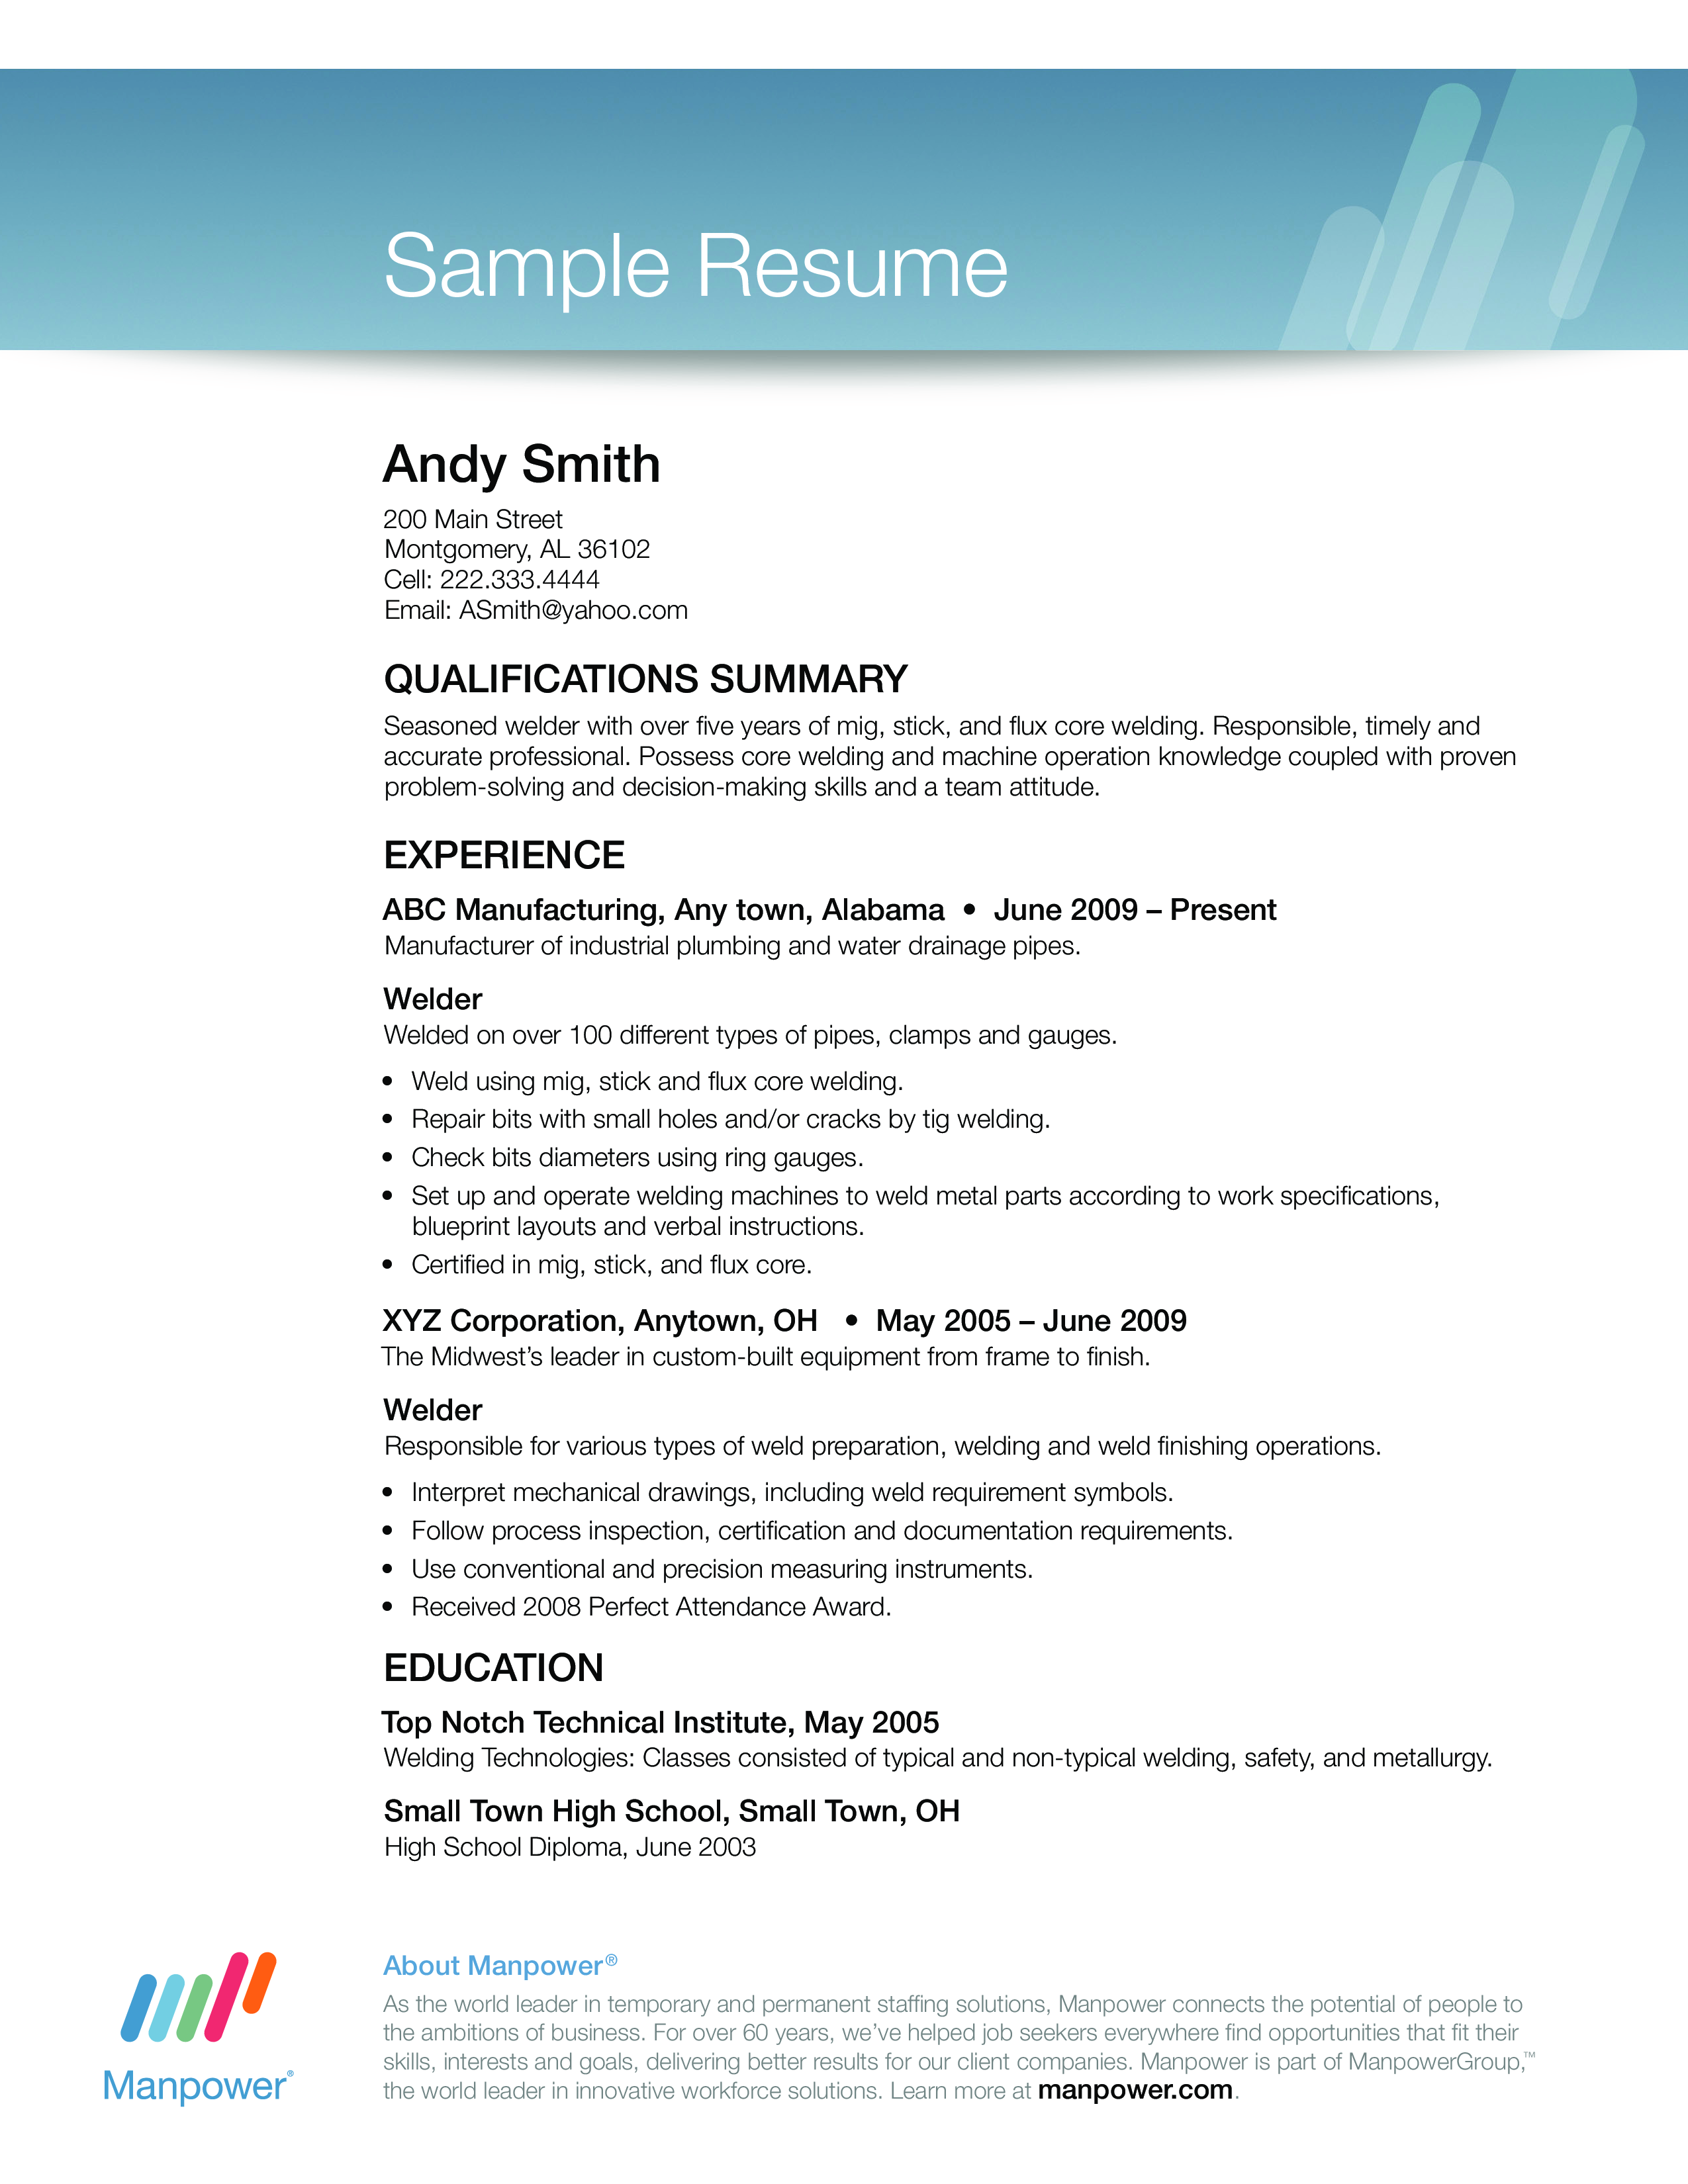 Sample of resume for job interview